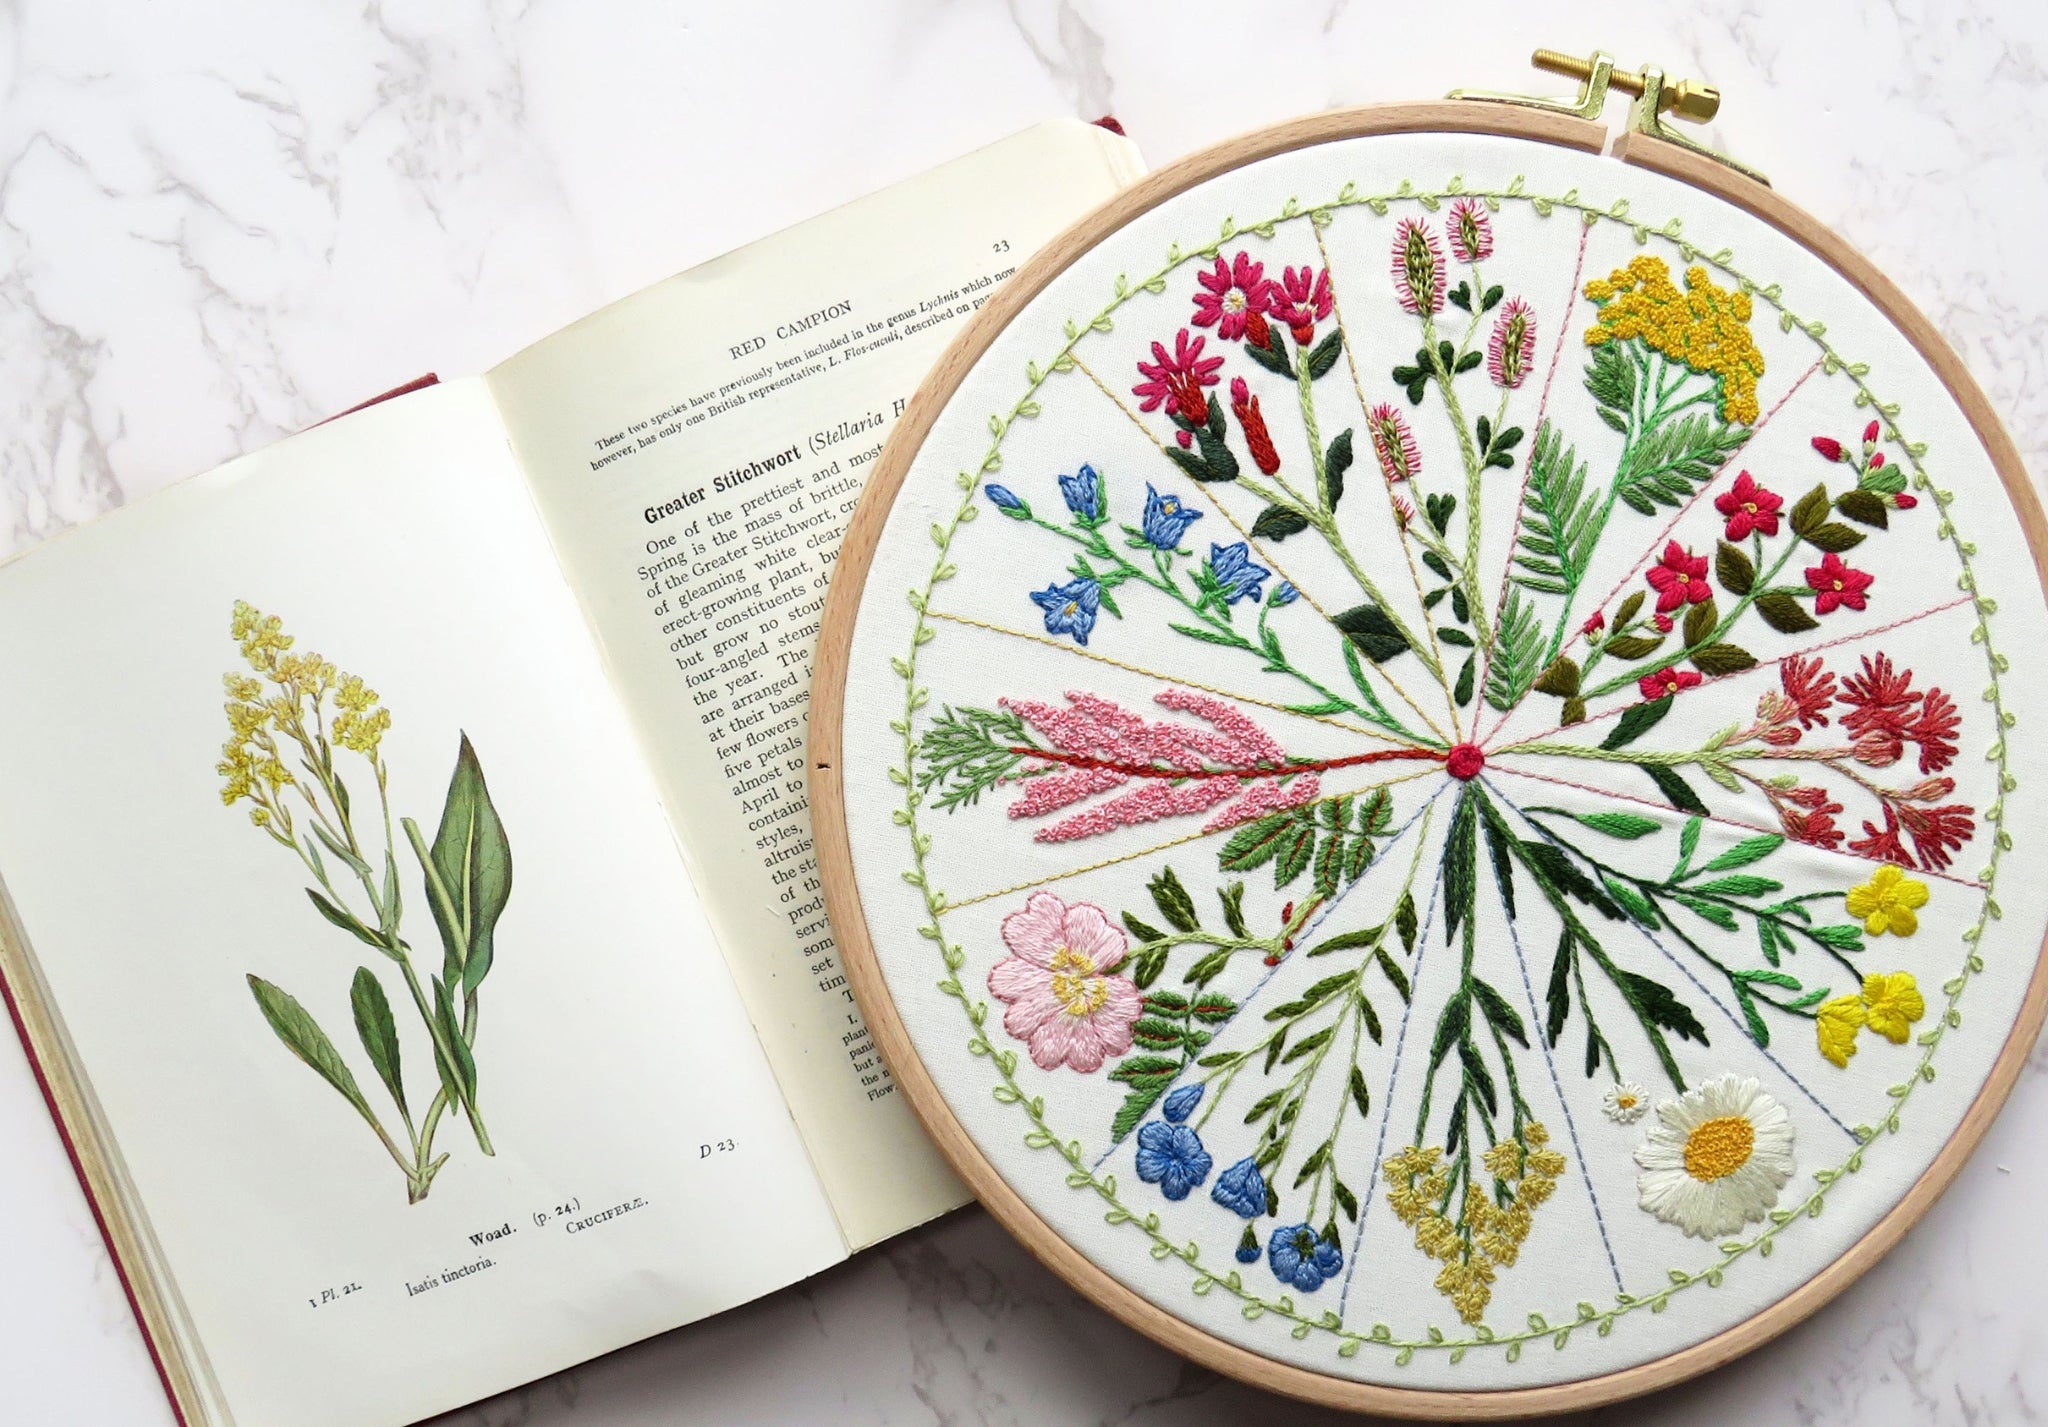 Hand Embroidery Transfer Patterns - Stitched Modern